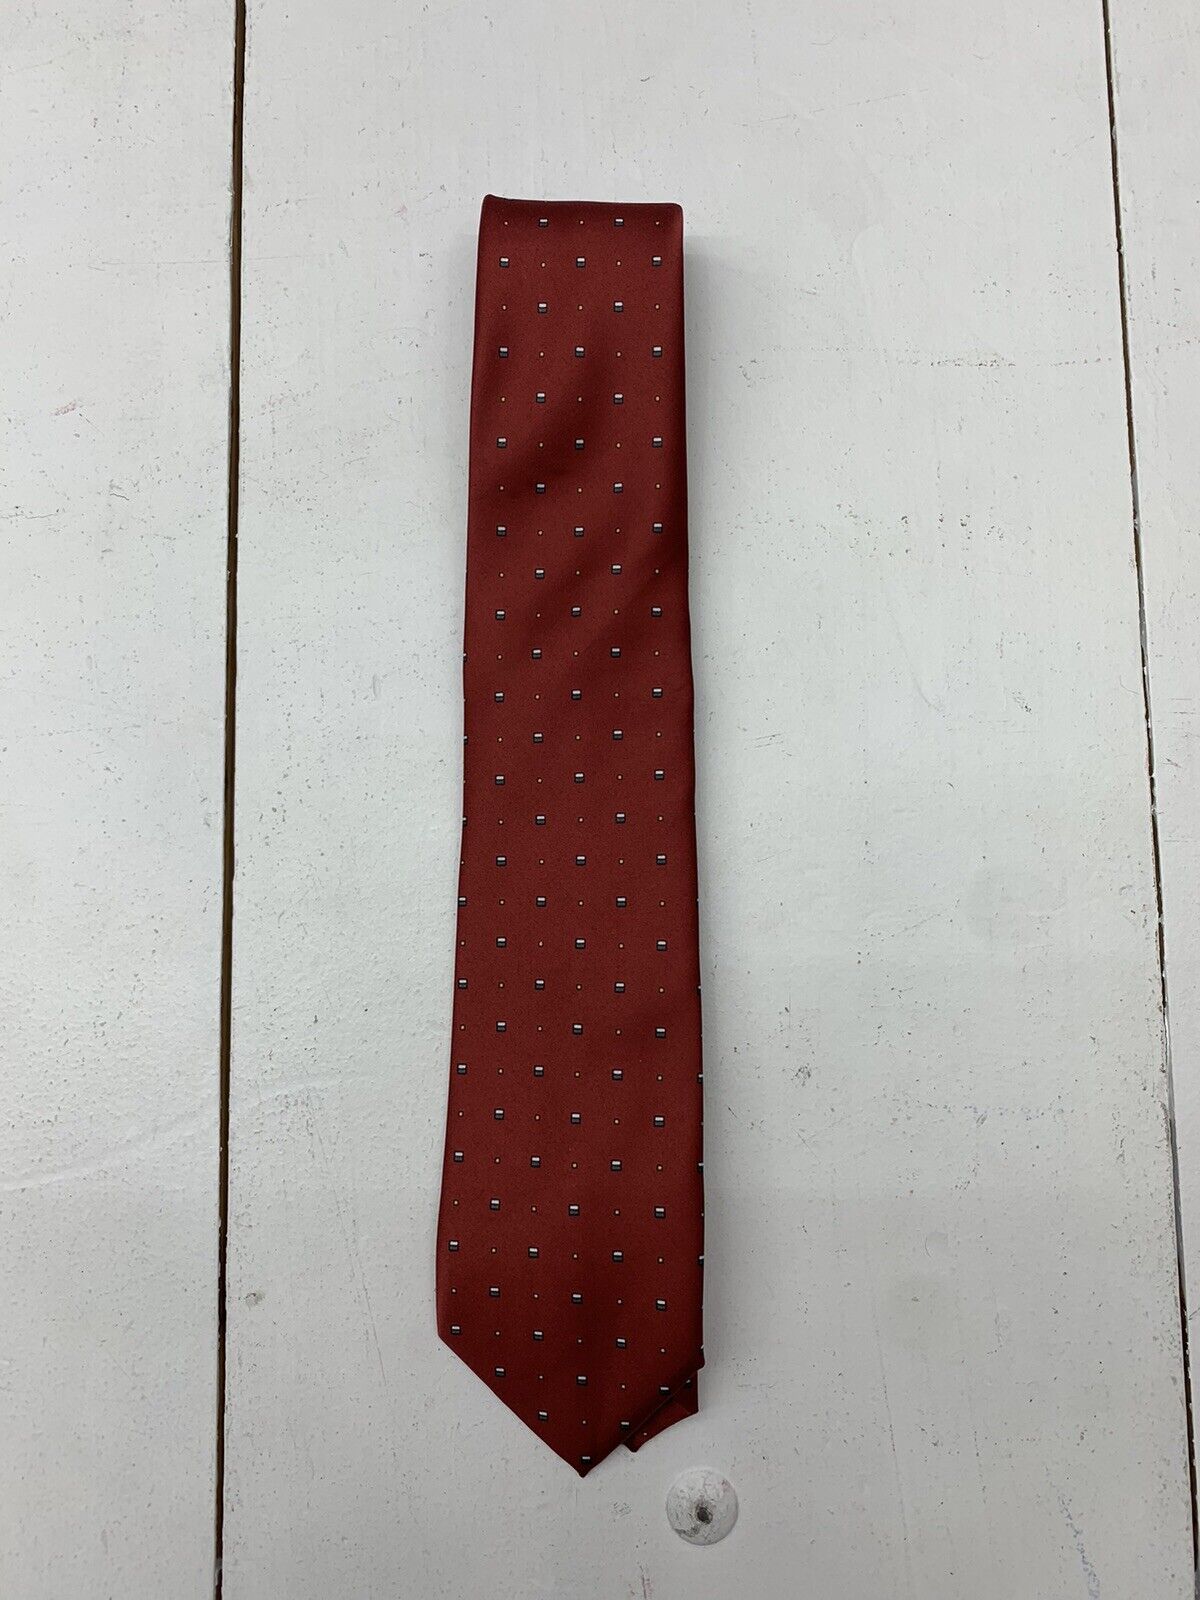 The Capital Grille Red Square Print Neck Tie